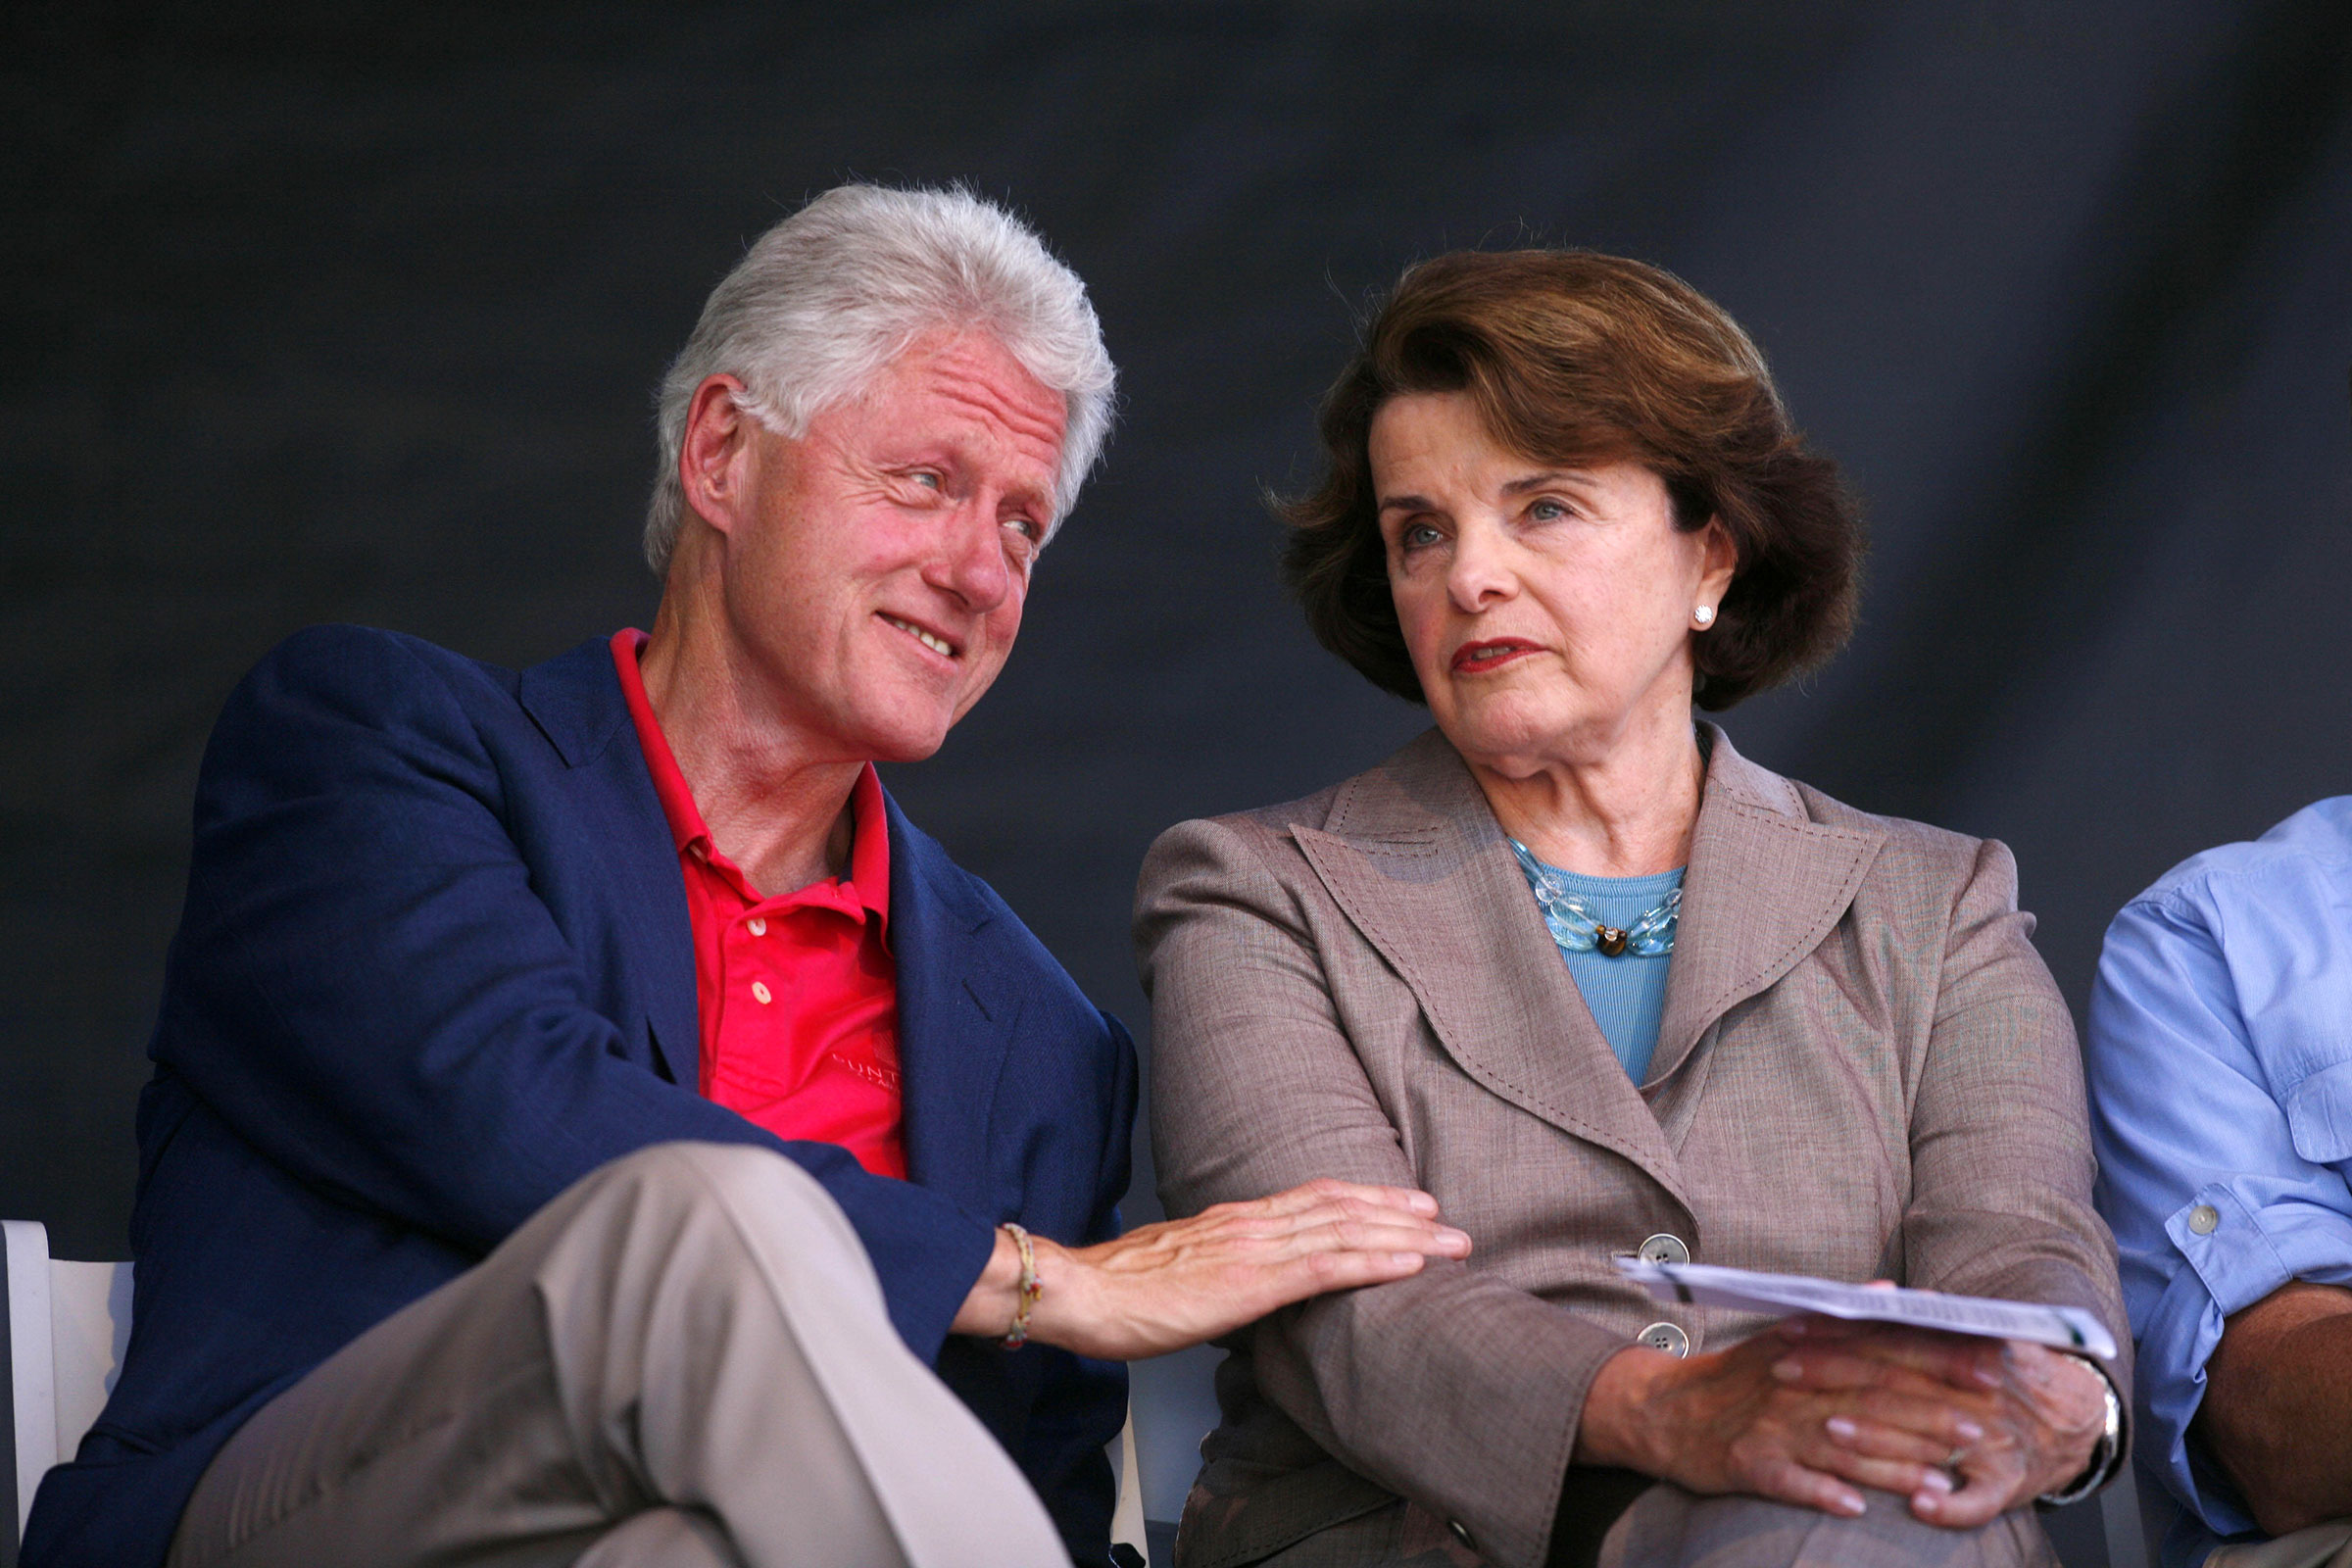 Former President Bill Clinton and US Senator Diane Feinstein, talk during the 10th Anniversary of the Lake Tahoe Forum at Sierra Nevada College, Friday Aug. 17, 2007.